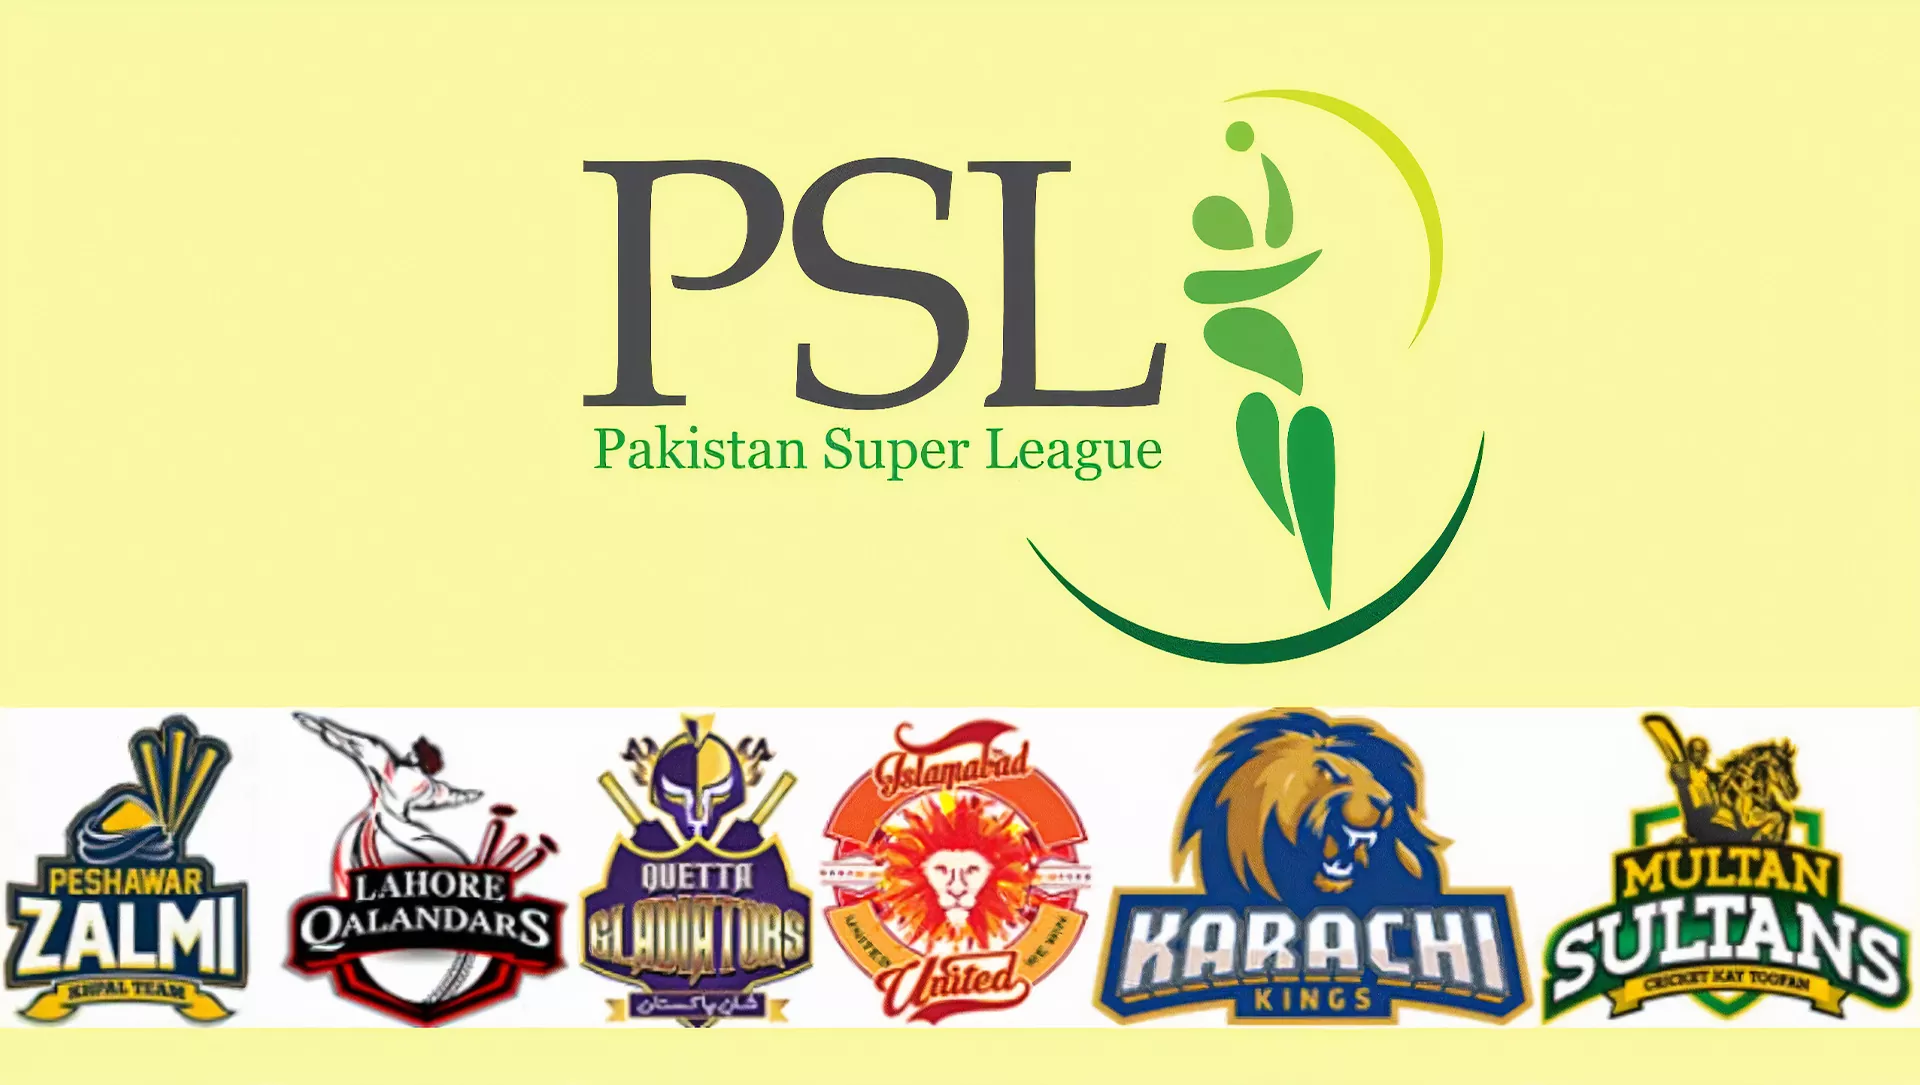 You can place bets on Pakistan Super League (PSL) after registering on the site.